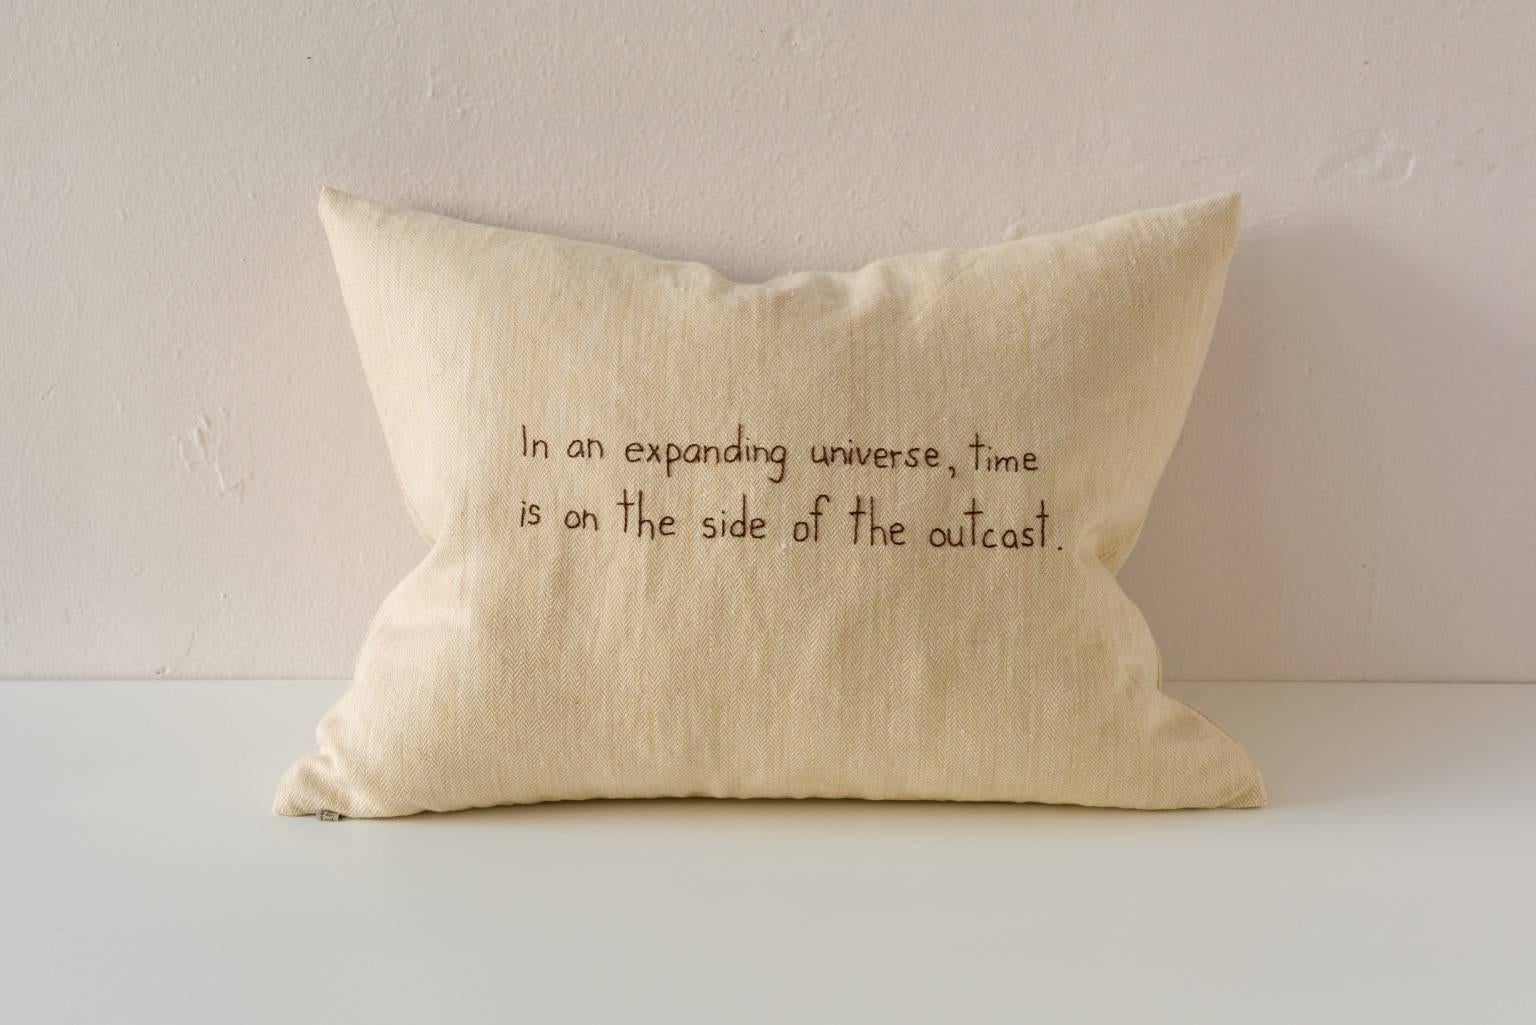 American Linen Embroidered Cushion Quentin Crisp, 